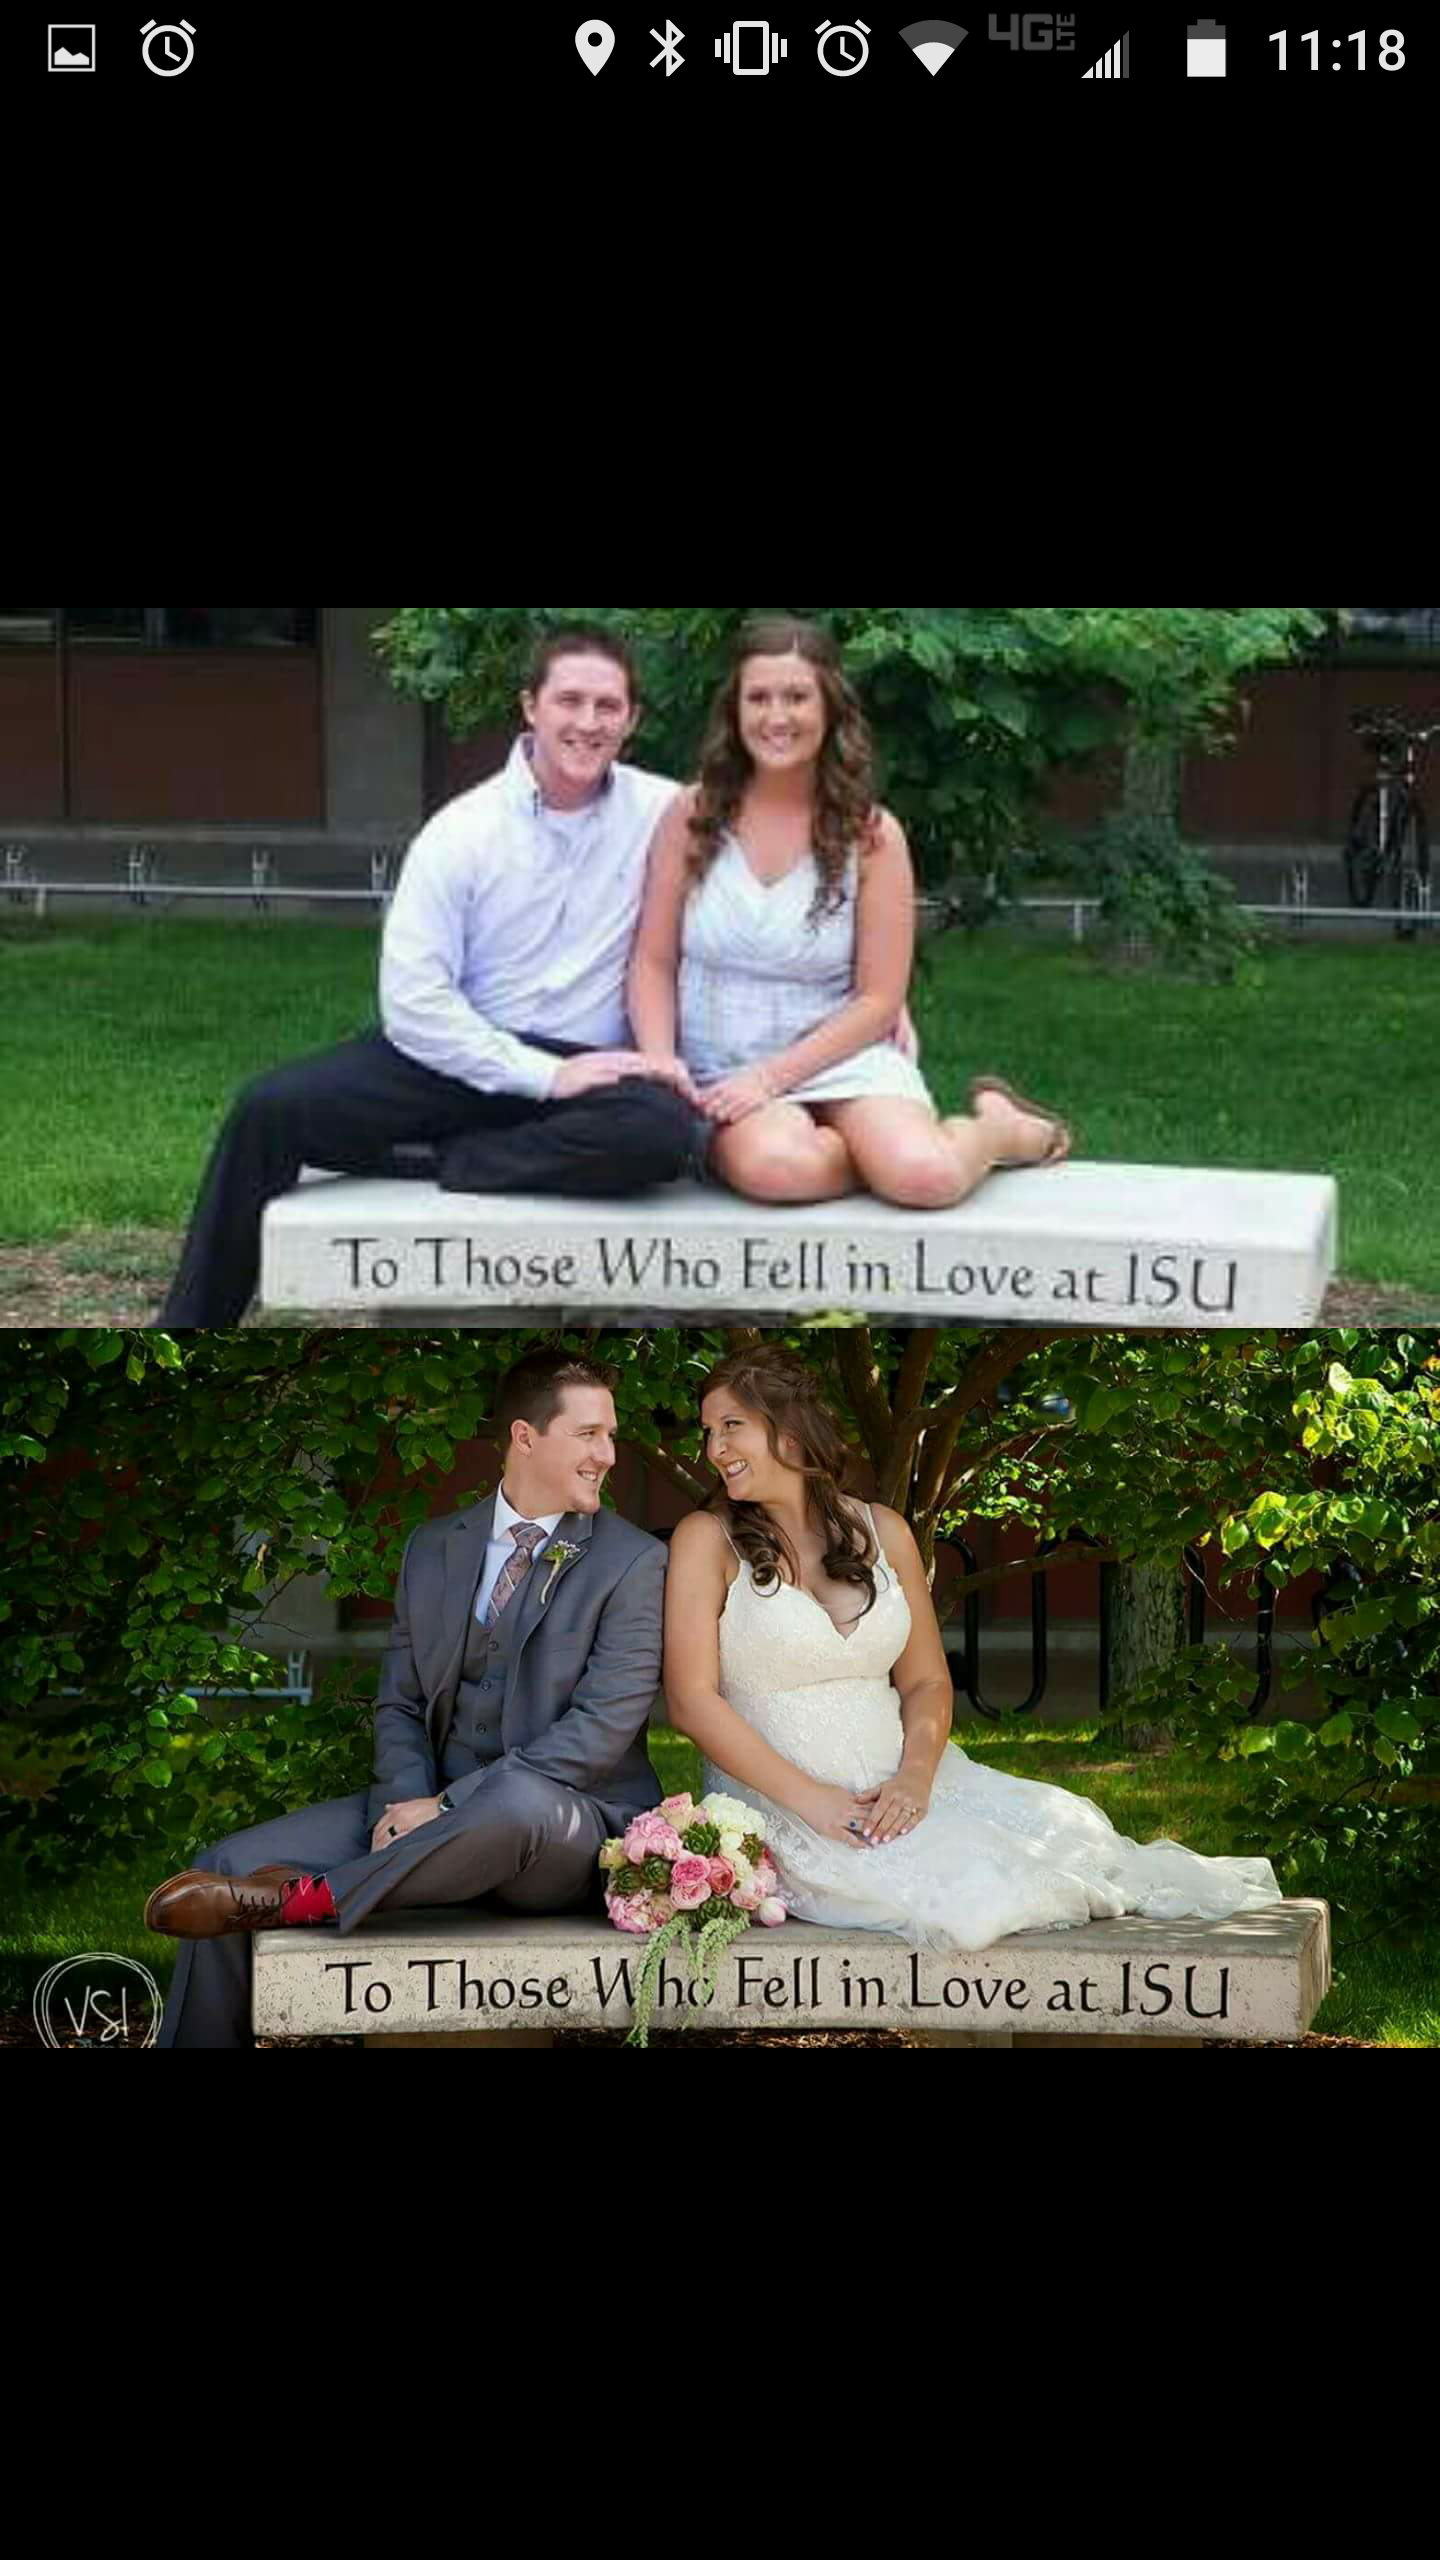 Tim Emerson ’10 and Hannah (Wallbaum) Emerson ’12 on the love bench